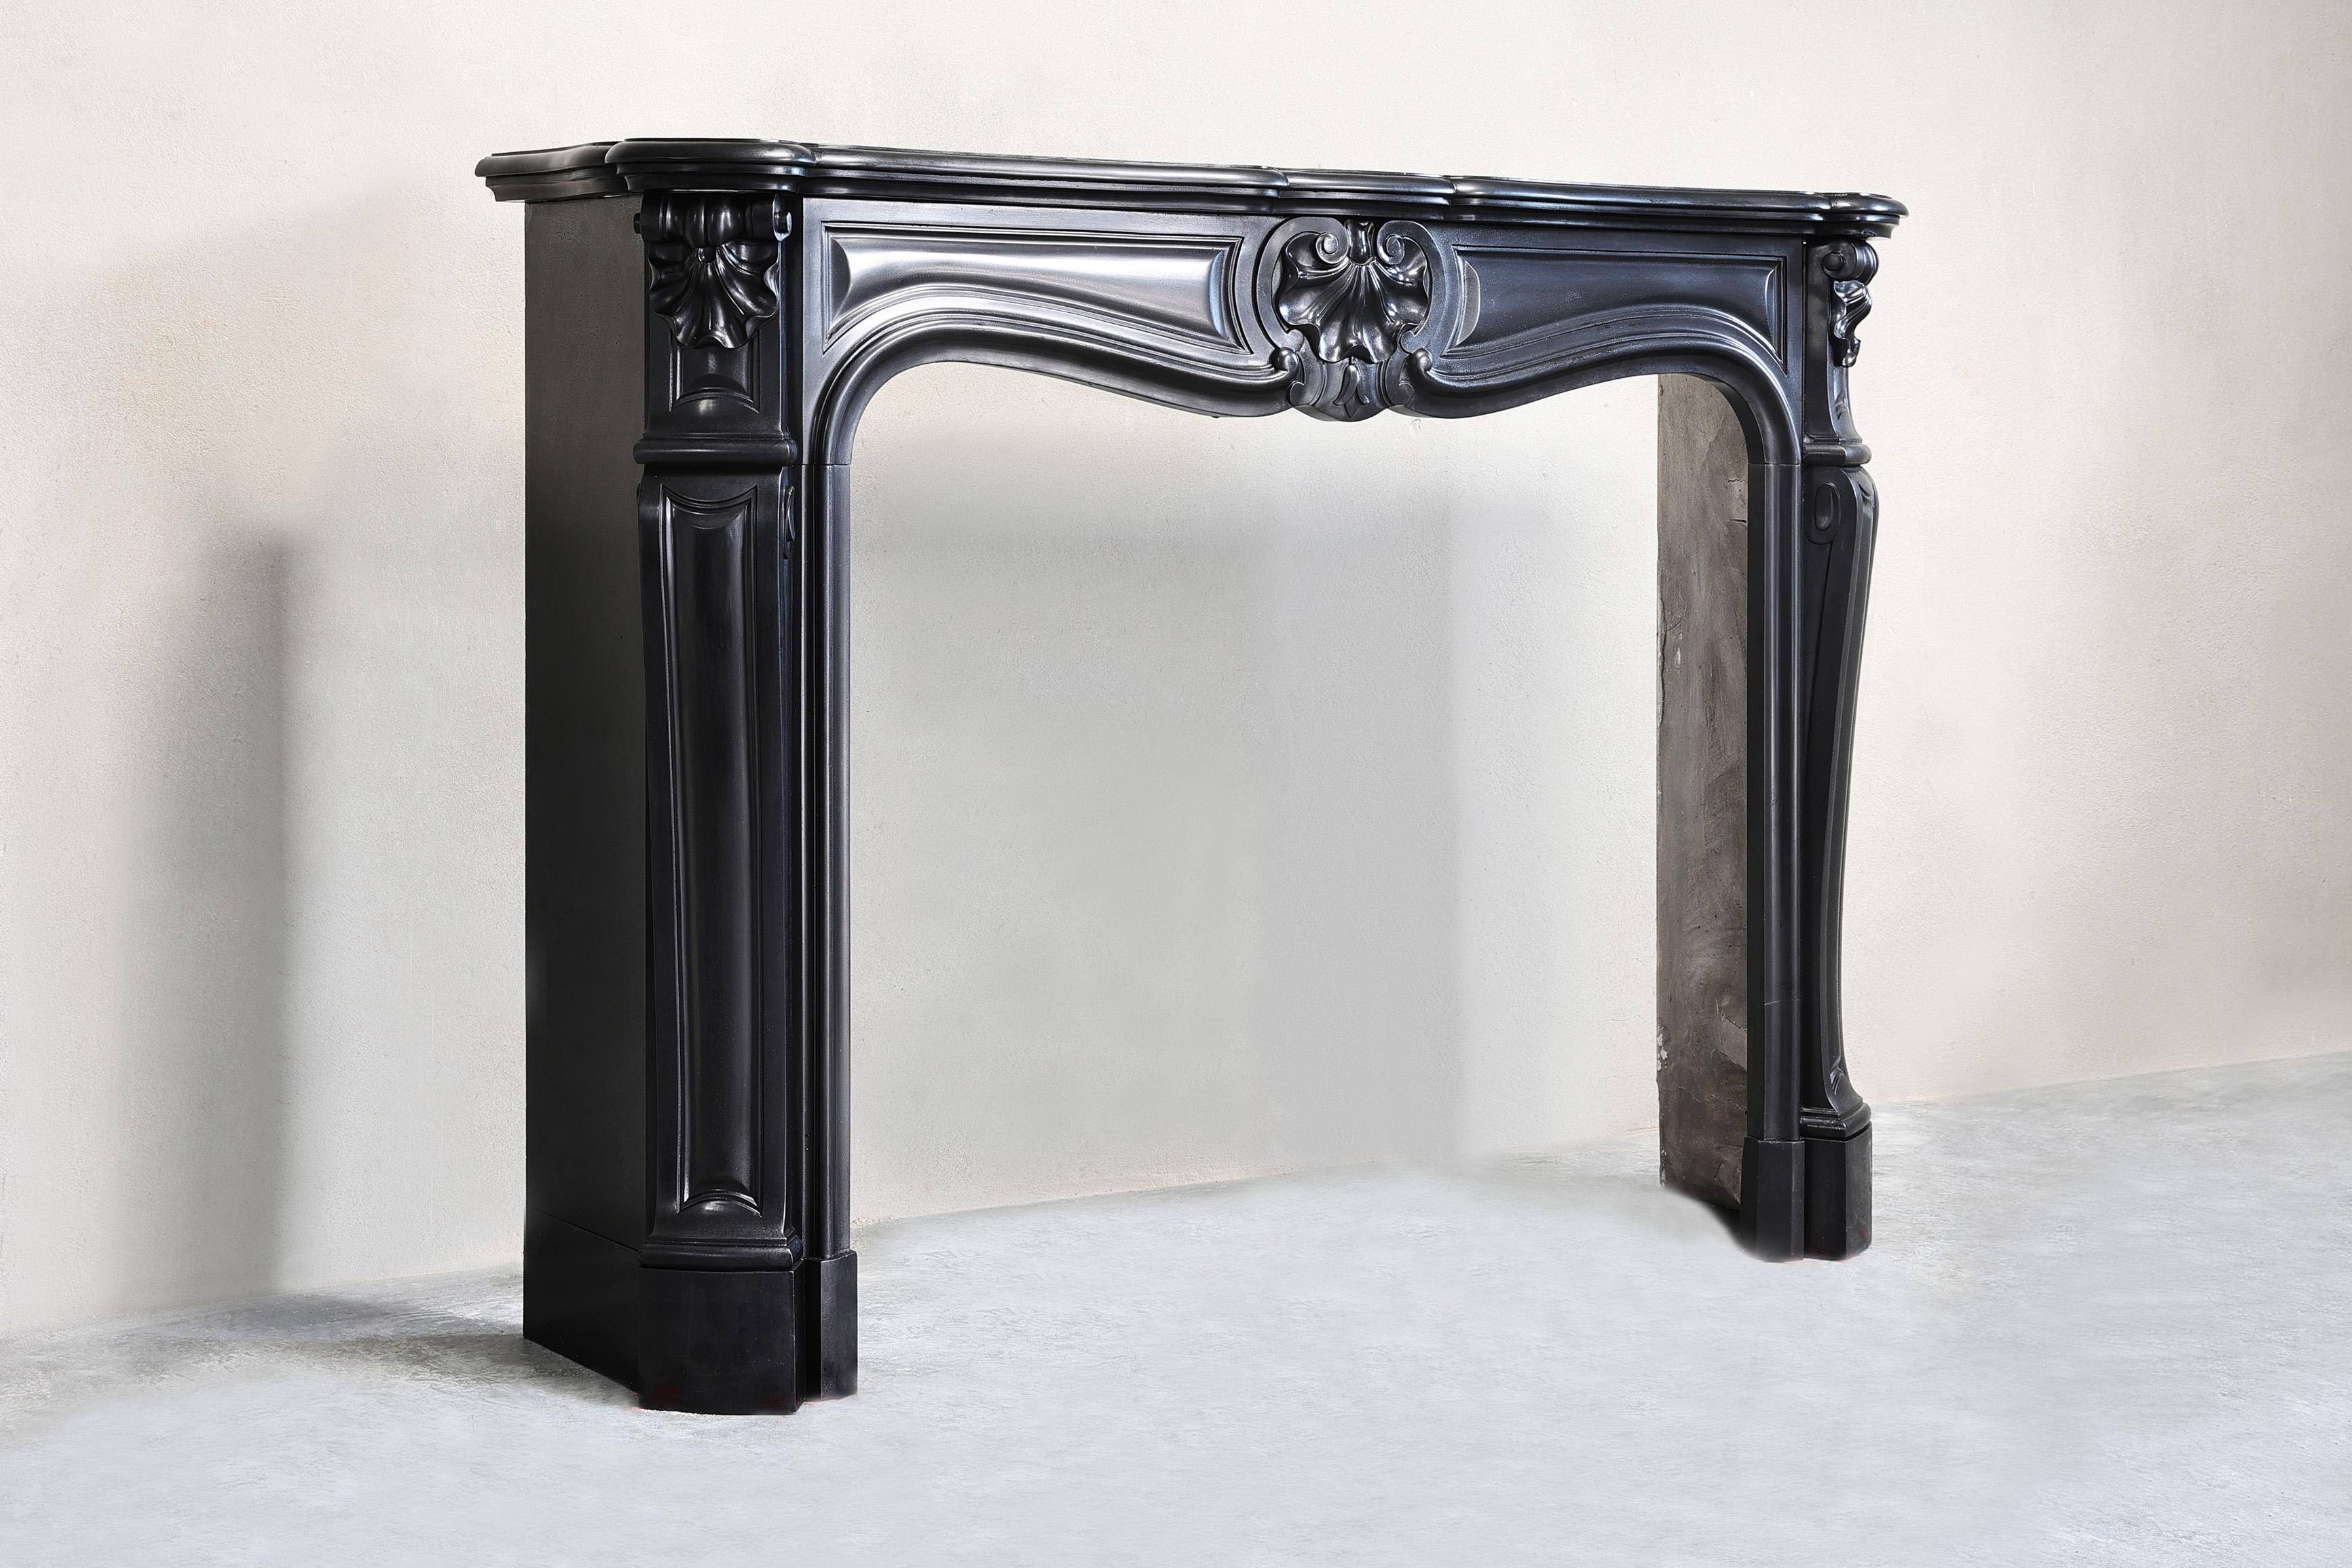 Beautiful antique fireplace of the rare type of Noir de Mazy marble from the 19th century in the style of Louis XV. This mantel has a scallop in the center of the front section and also two scallops on the legs! A very chic mantelpiece with a warm